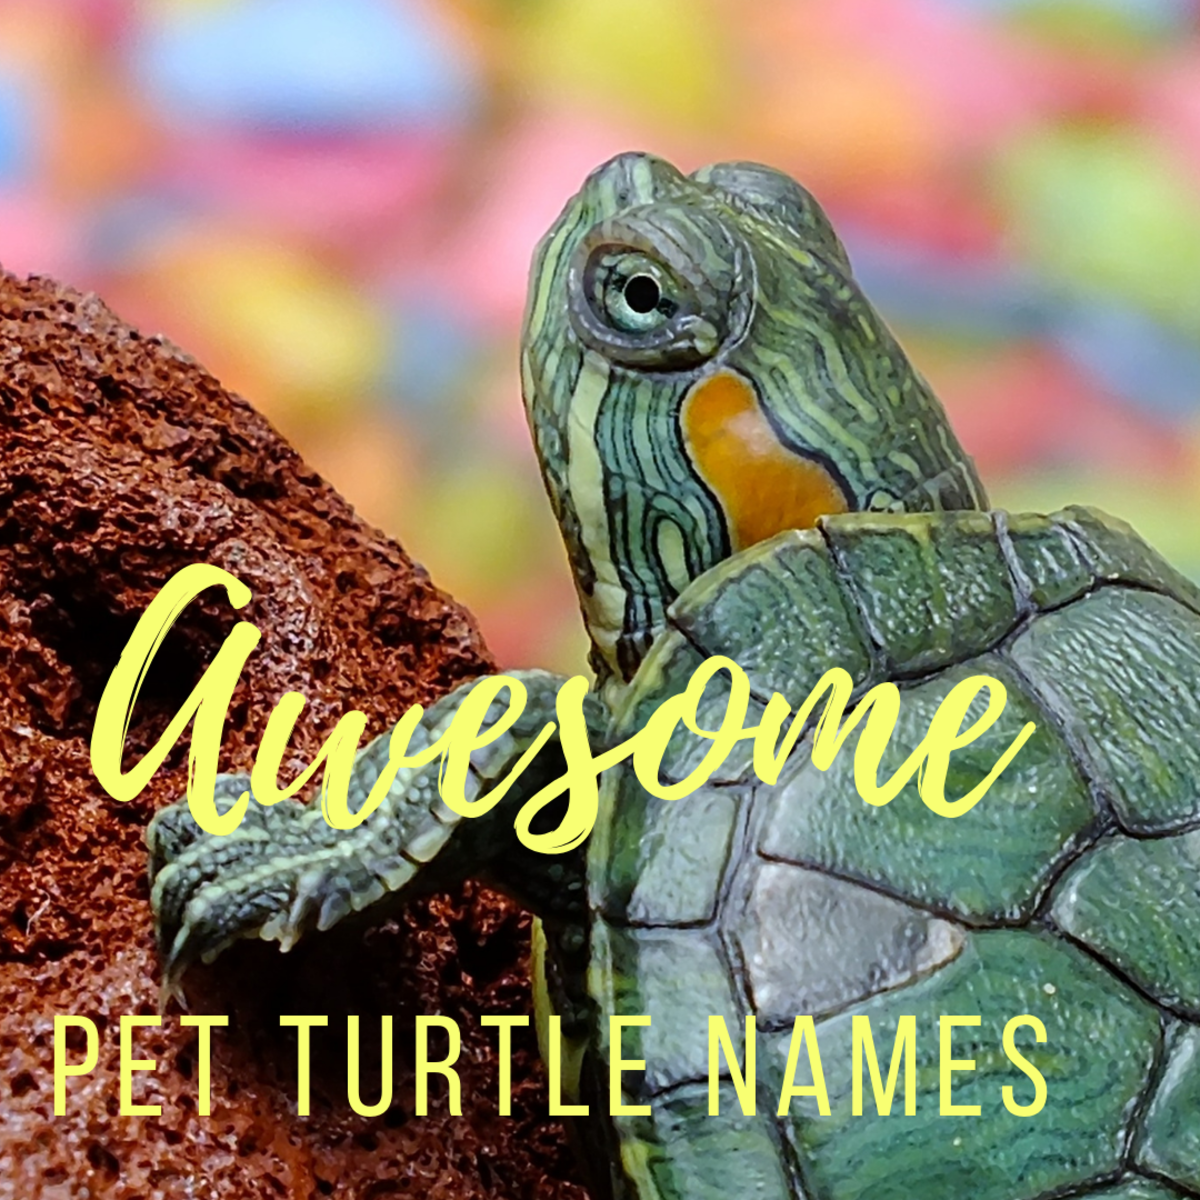 100 Awesome And Fun Pet Turtle And Tortoise Names Pethelpful By Fellow Animal Lovers And Experts,Moroccan Mint Tea Set